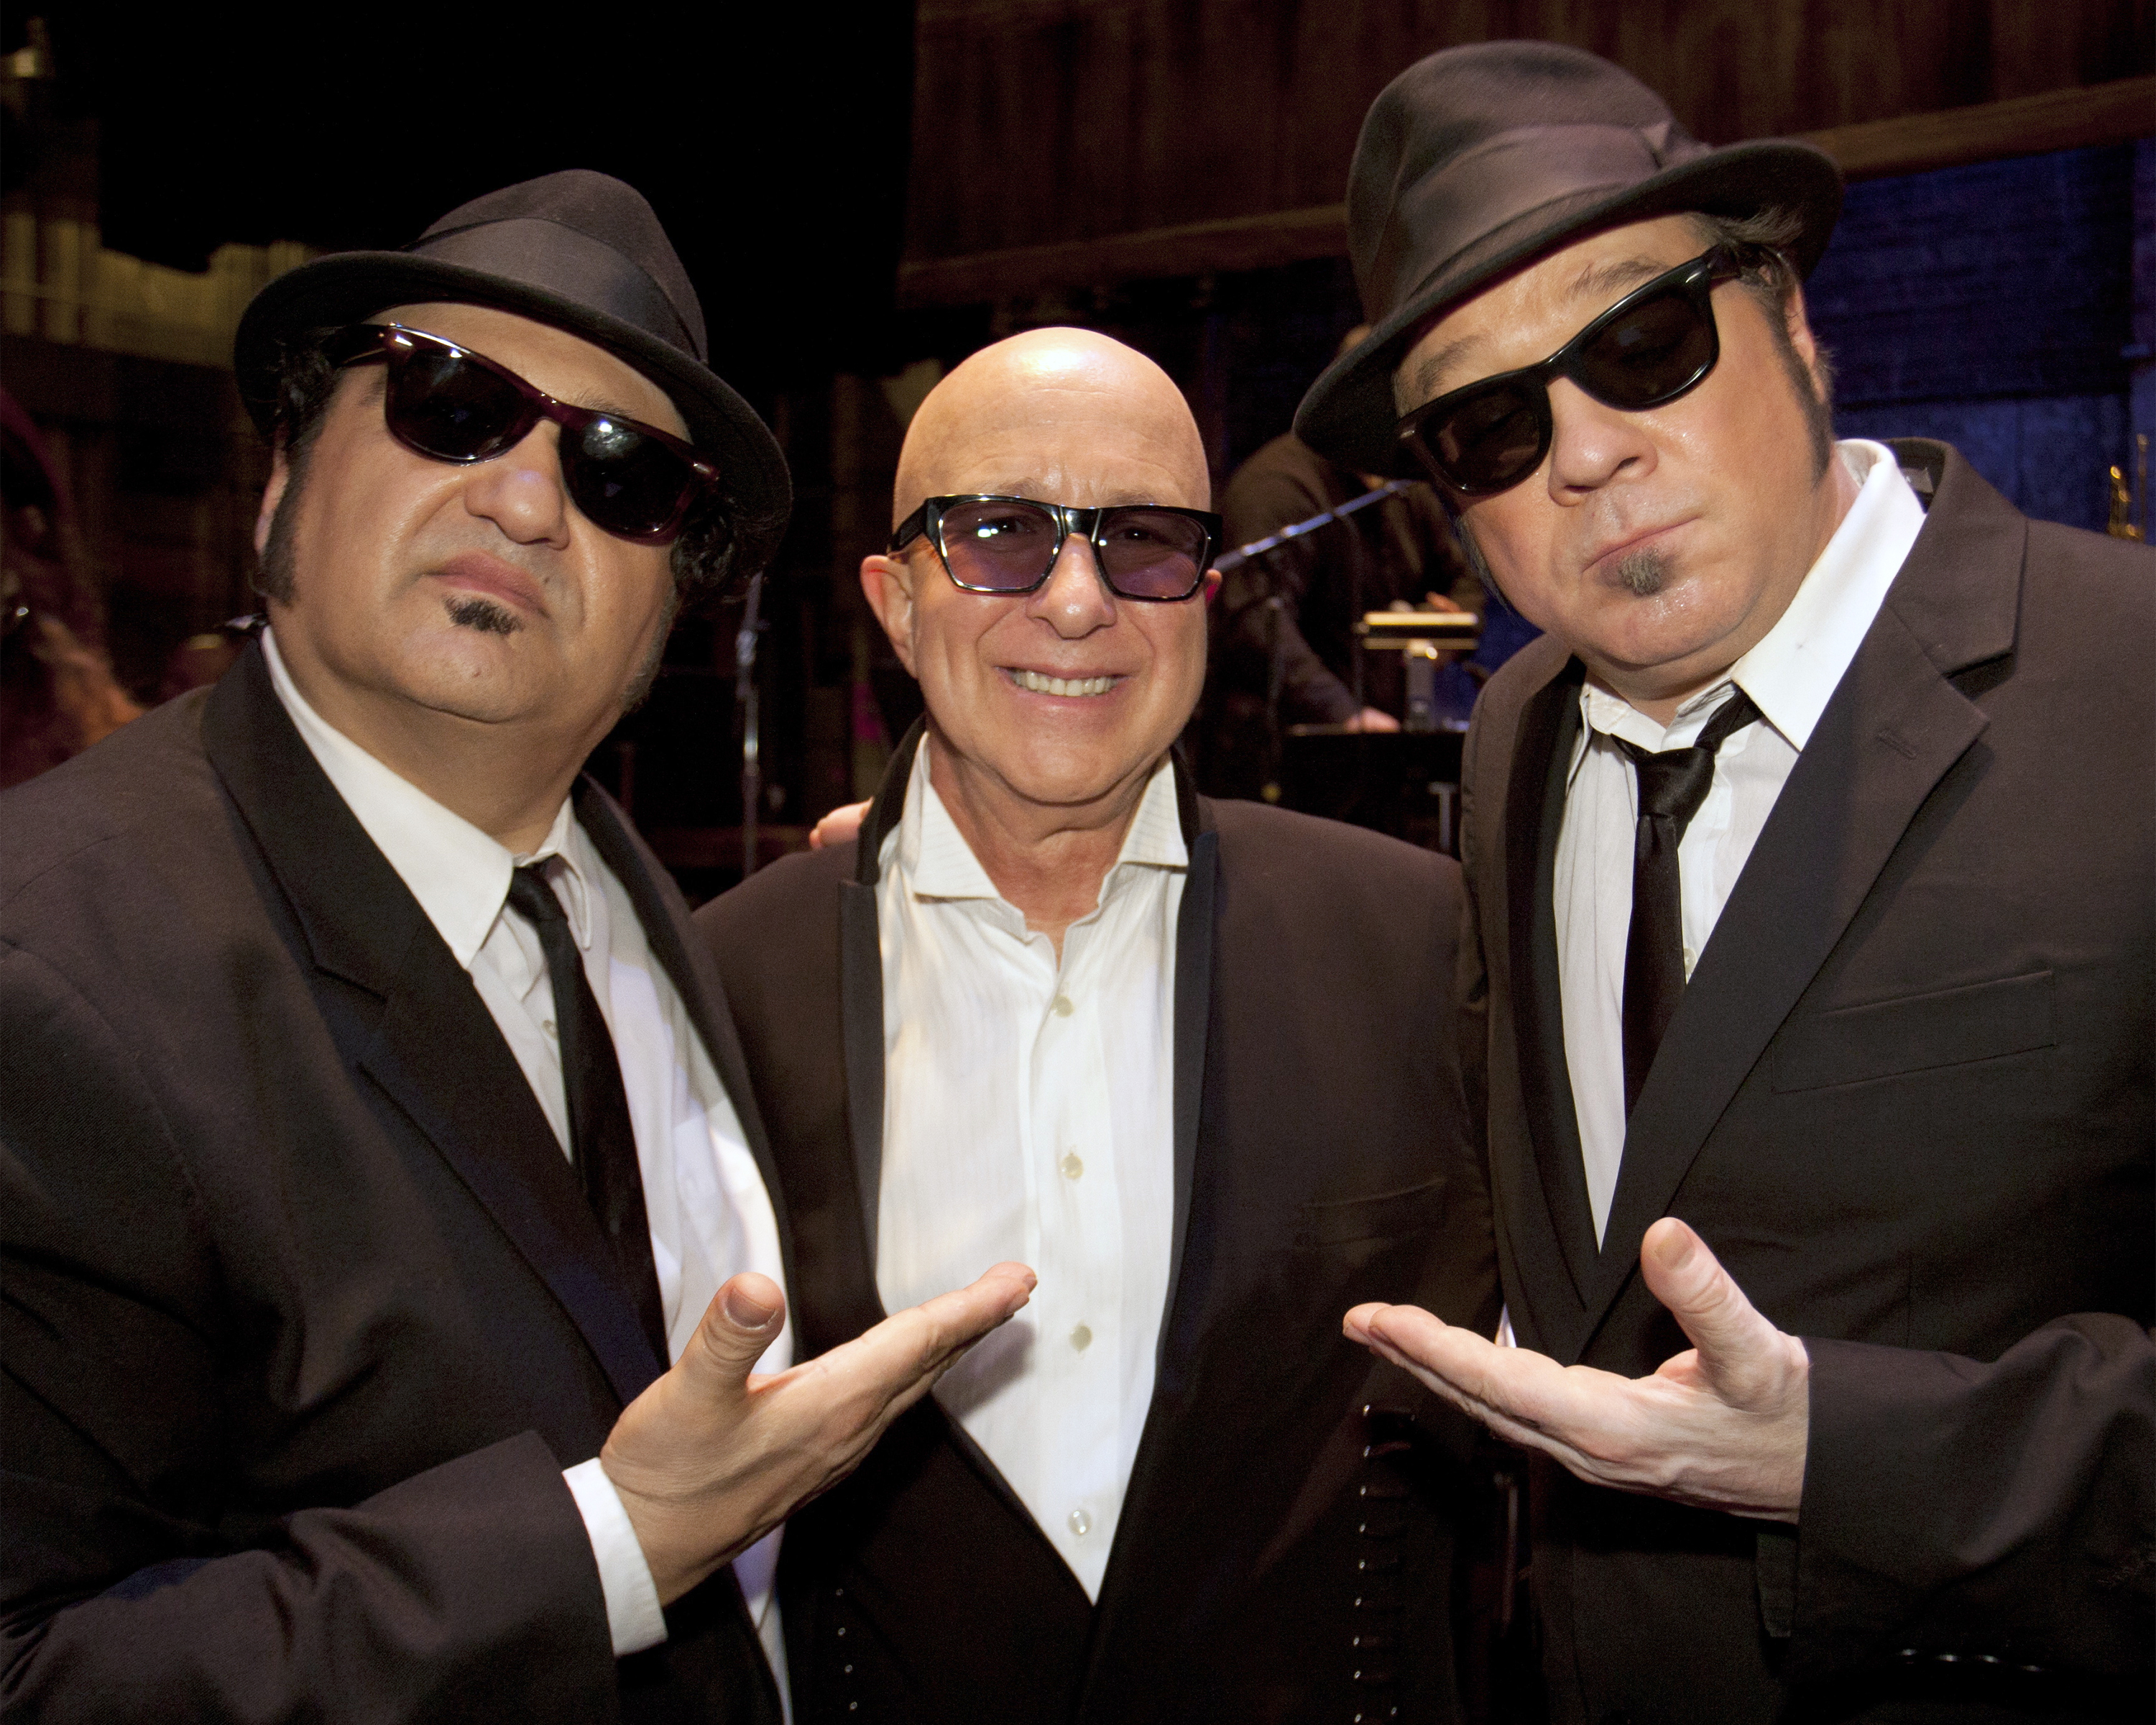 Official Blues Brothers Revue - Publicity Images